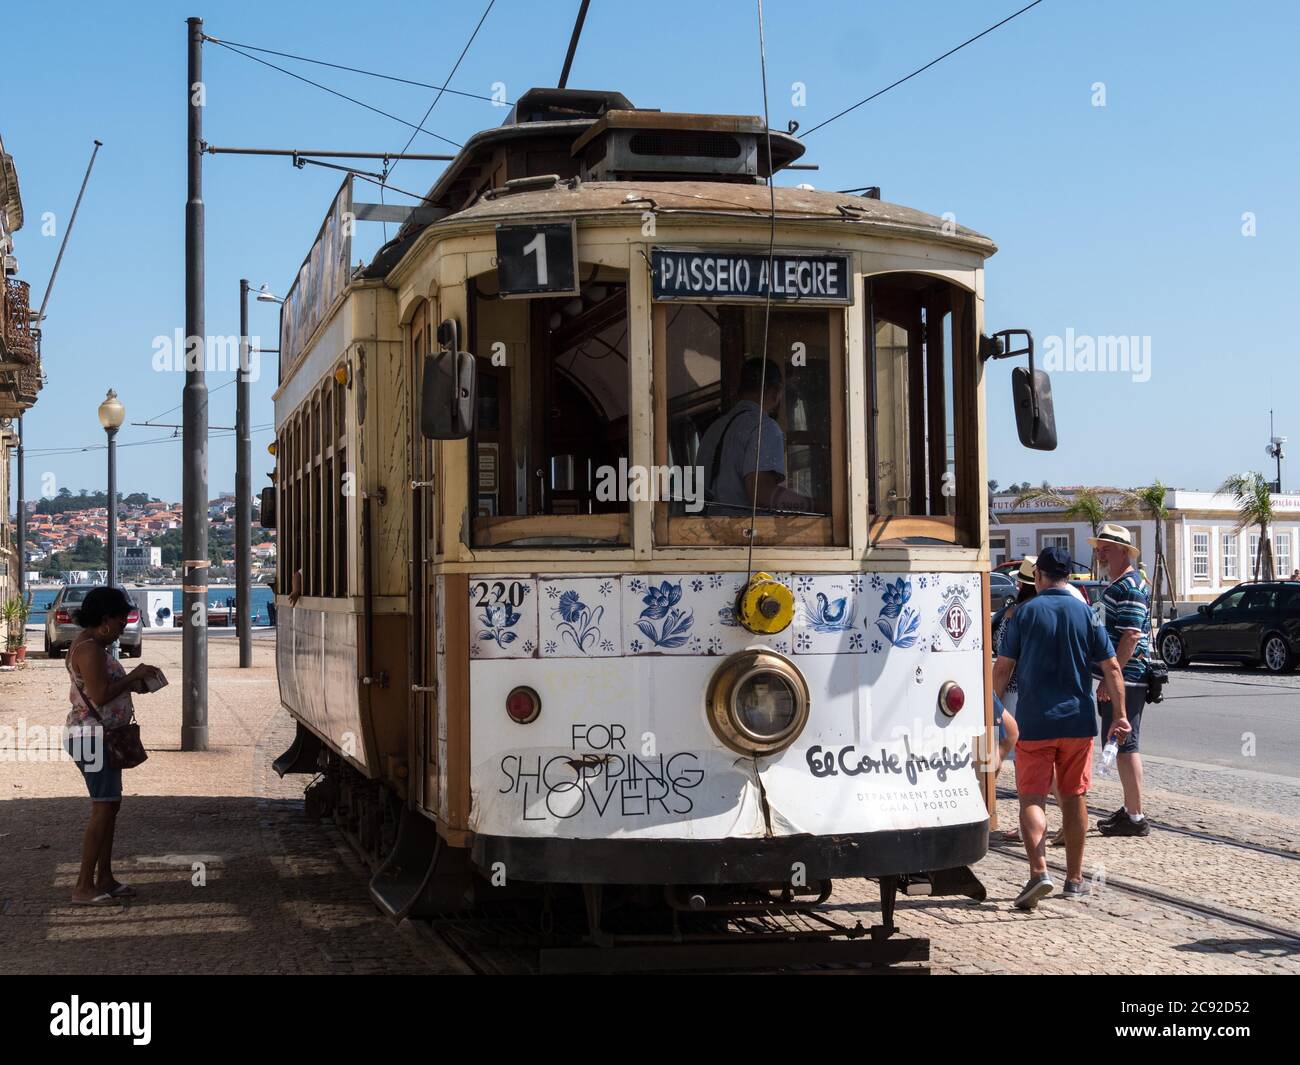 PORTO, PORTUGAL - Sep 02, 2019: View of the historic tram number 1 in Porto Stock Photo